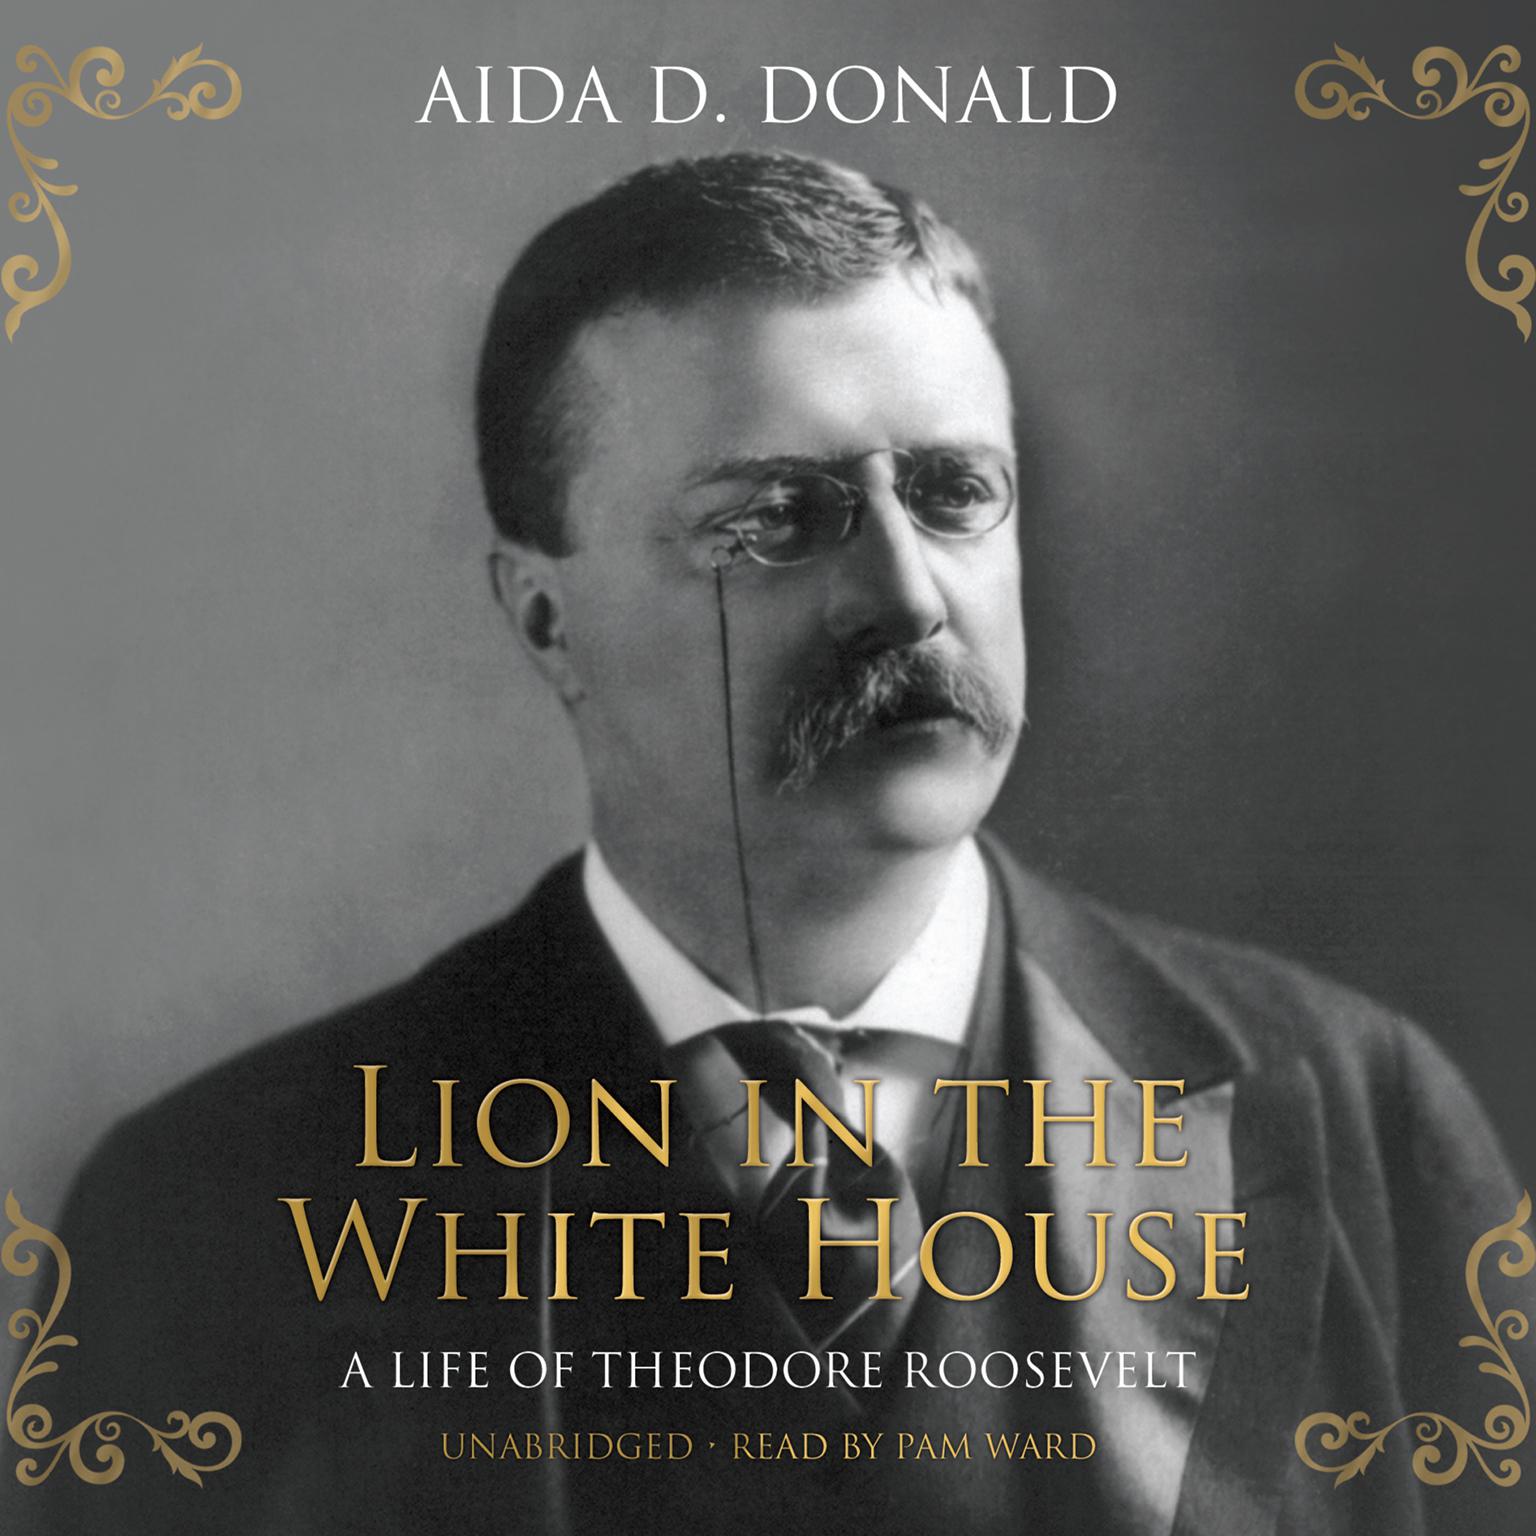 Lion in the White House: A Life of Theodore Roosevelt Audiobook, by Aida D. Donald